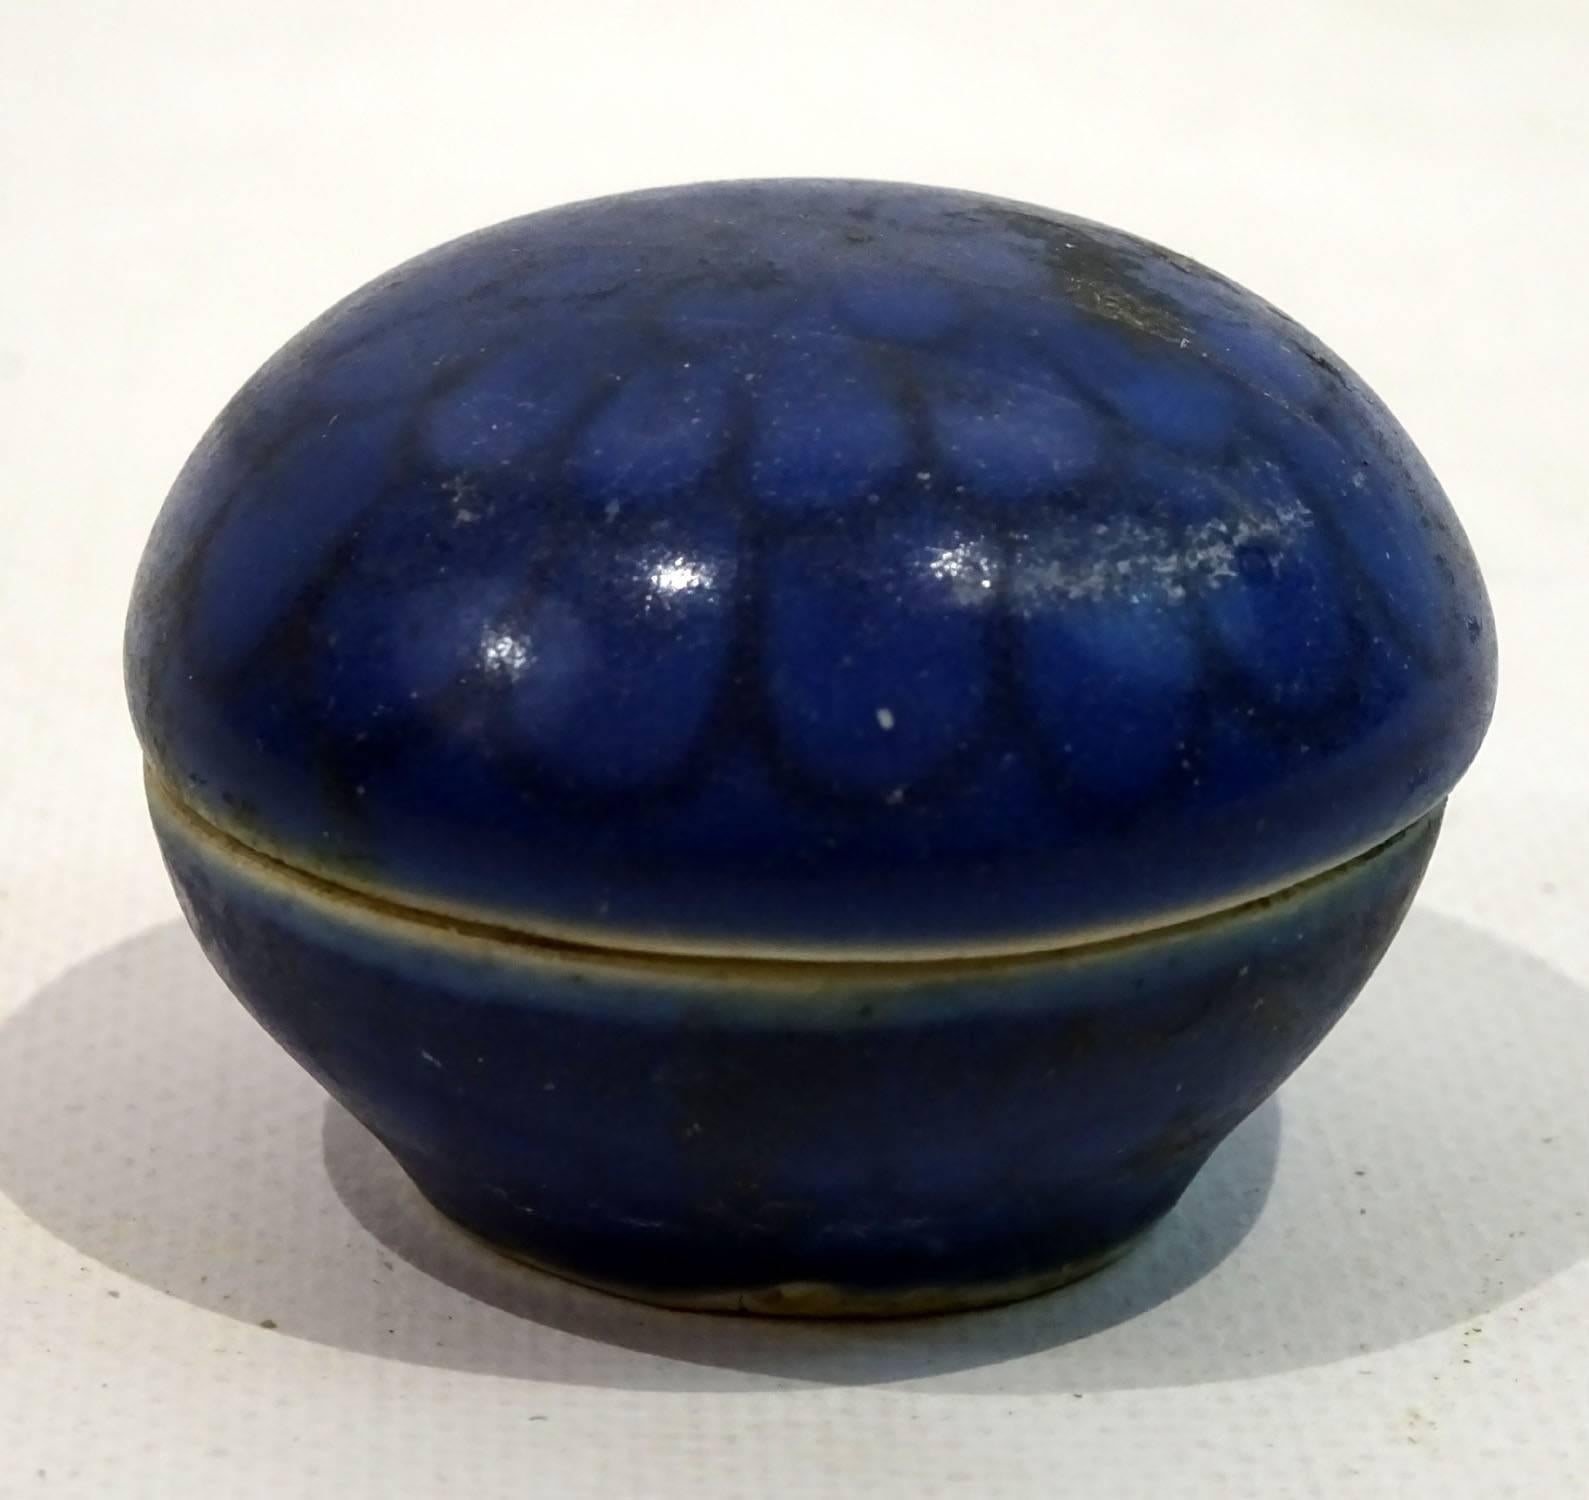 17th century Chinese cosmetic jar with cover from The Hatcher Collection, salvaged by Captain Michael Hatcher in the early 1980s, purchased from Christies in Amsterdam in 1984, Ming dynasty, Transitional period.